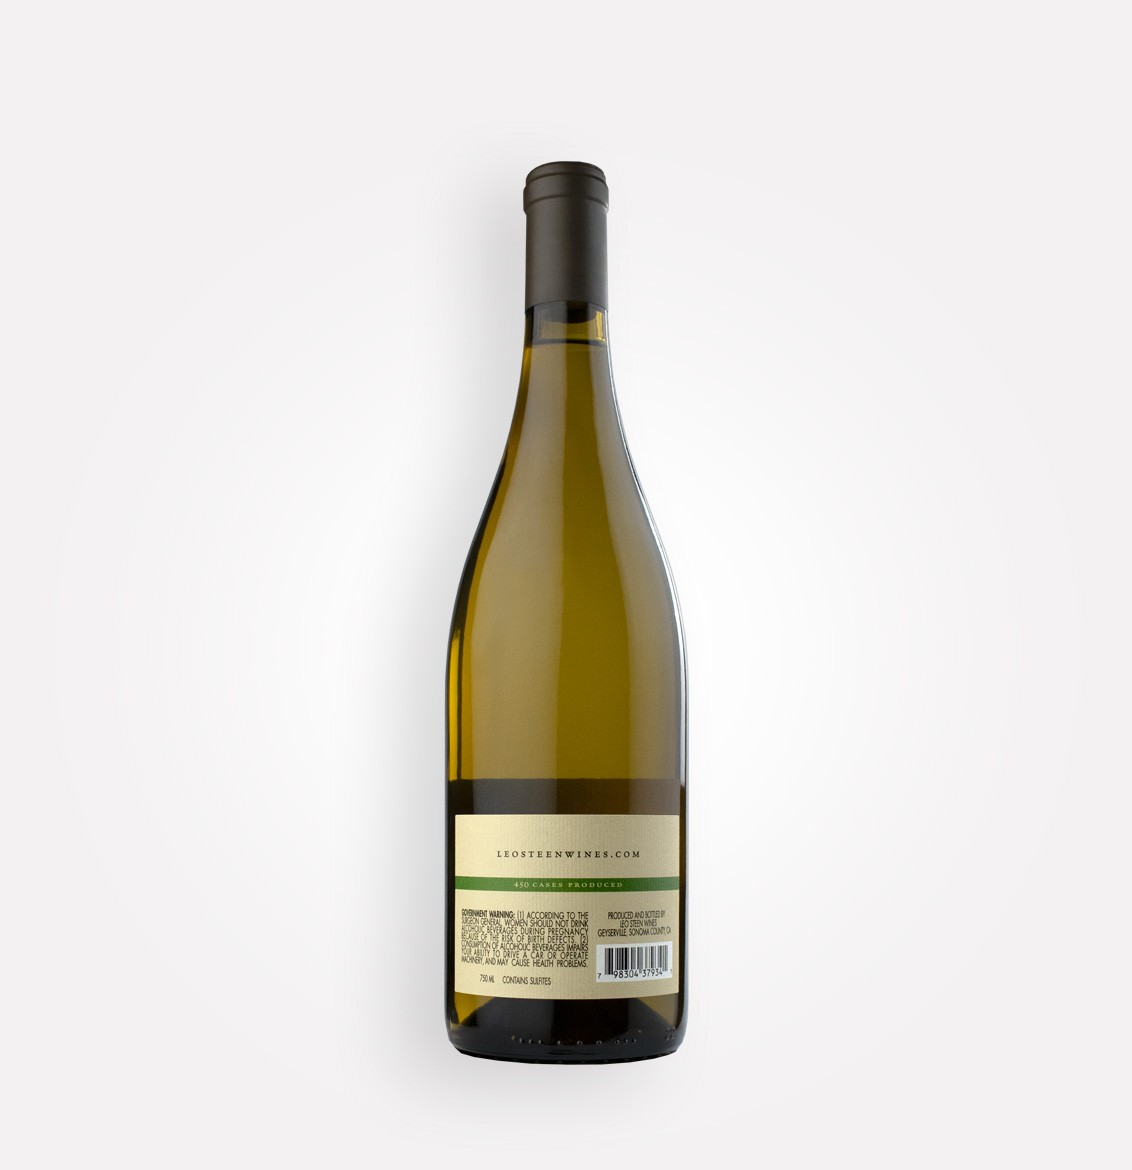 Back bottle view of Leo Steen 2020 Chenin Blanc wine from California’s Mendocino County